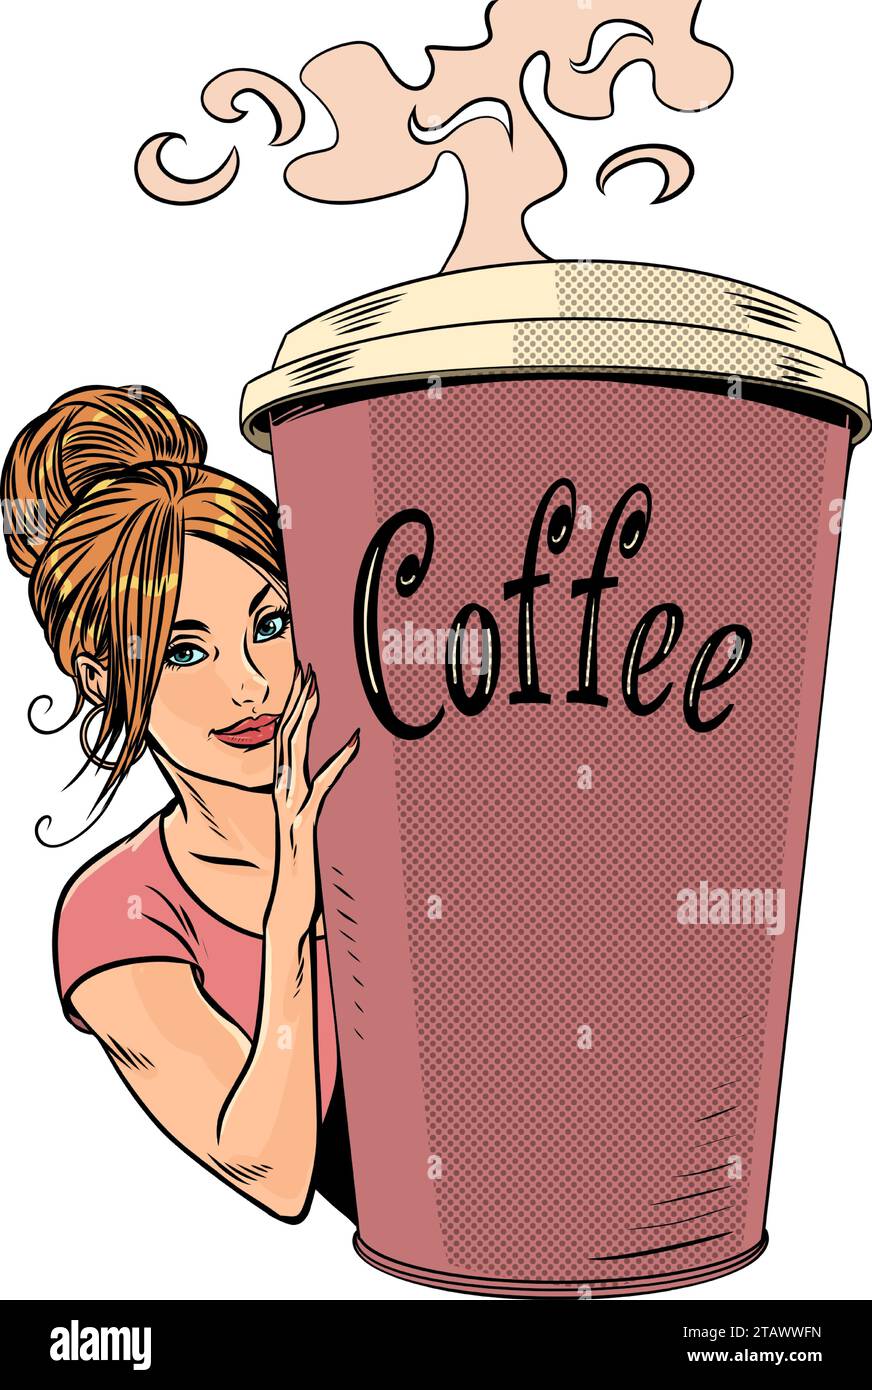 Seasonal advantageous offer from a coffee shop. The girl looks out to the left of the cup of coffee. A hot drink to warm you up. Pop Art Retro Vector Stock Vector